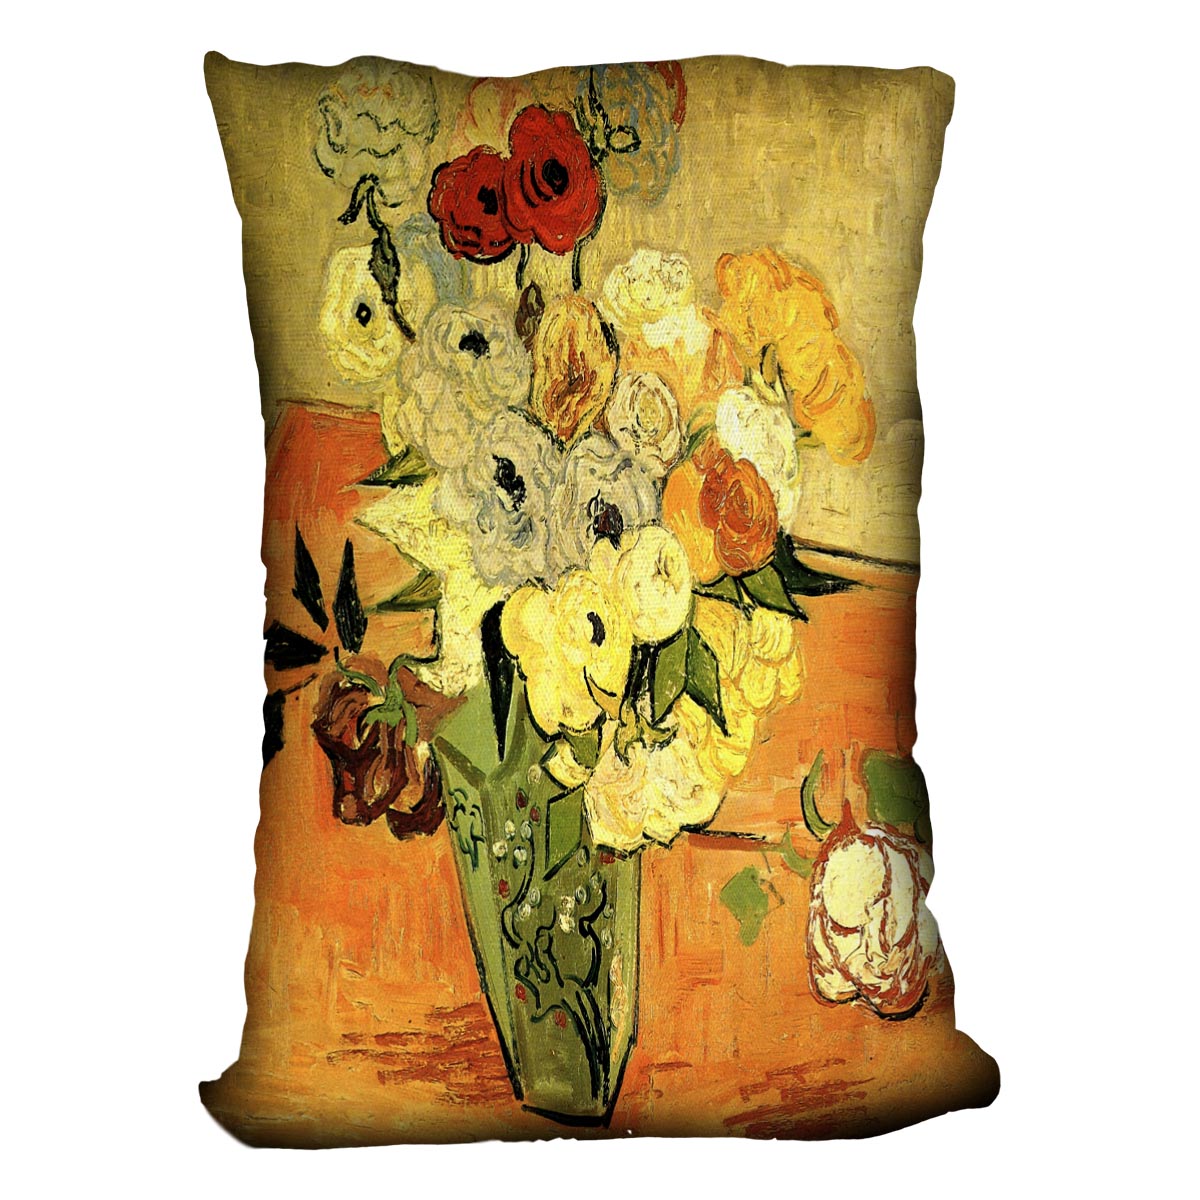 Still Life Japanese Vase with Roses and Anemones by Van Gogh Cushion